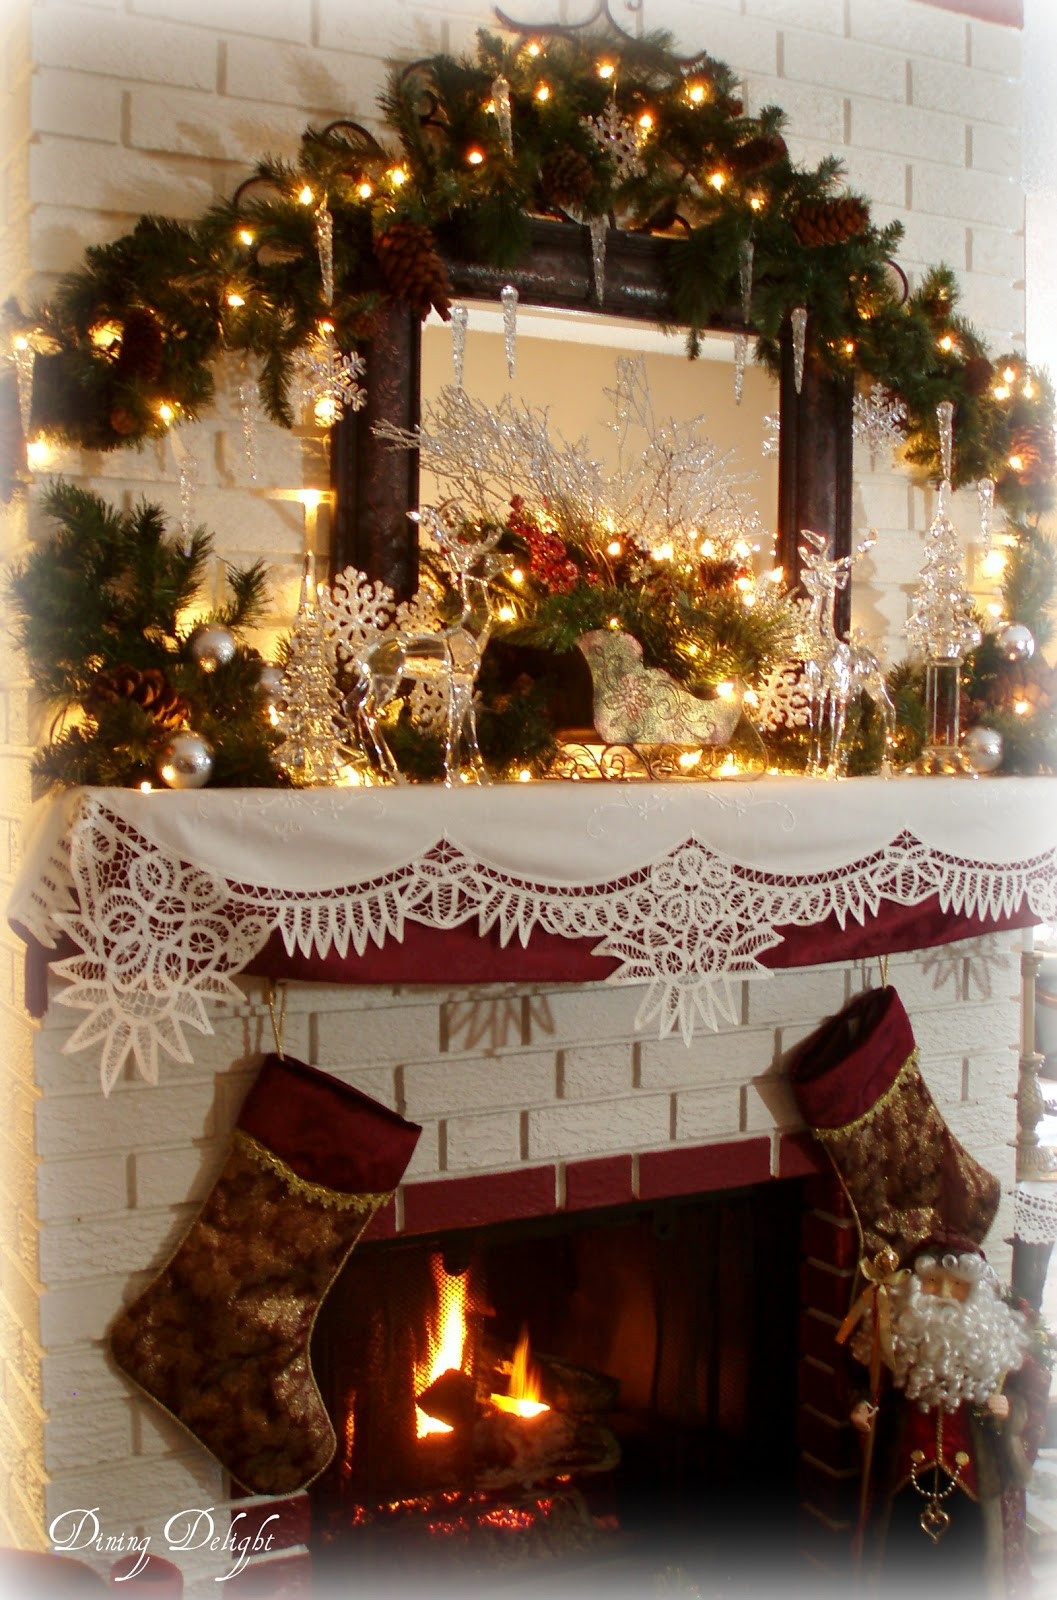 Fireplace At Christmas
 Dining Delight Christmas Home Tour